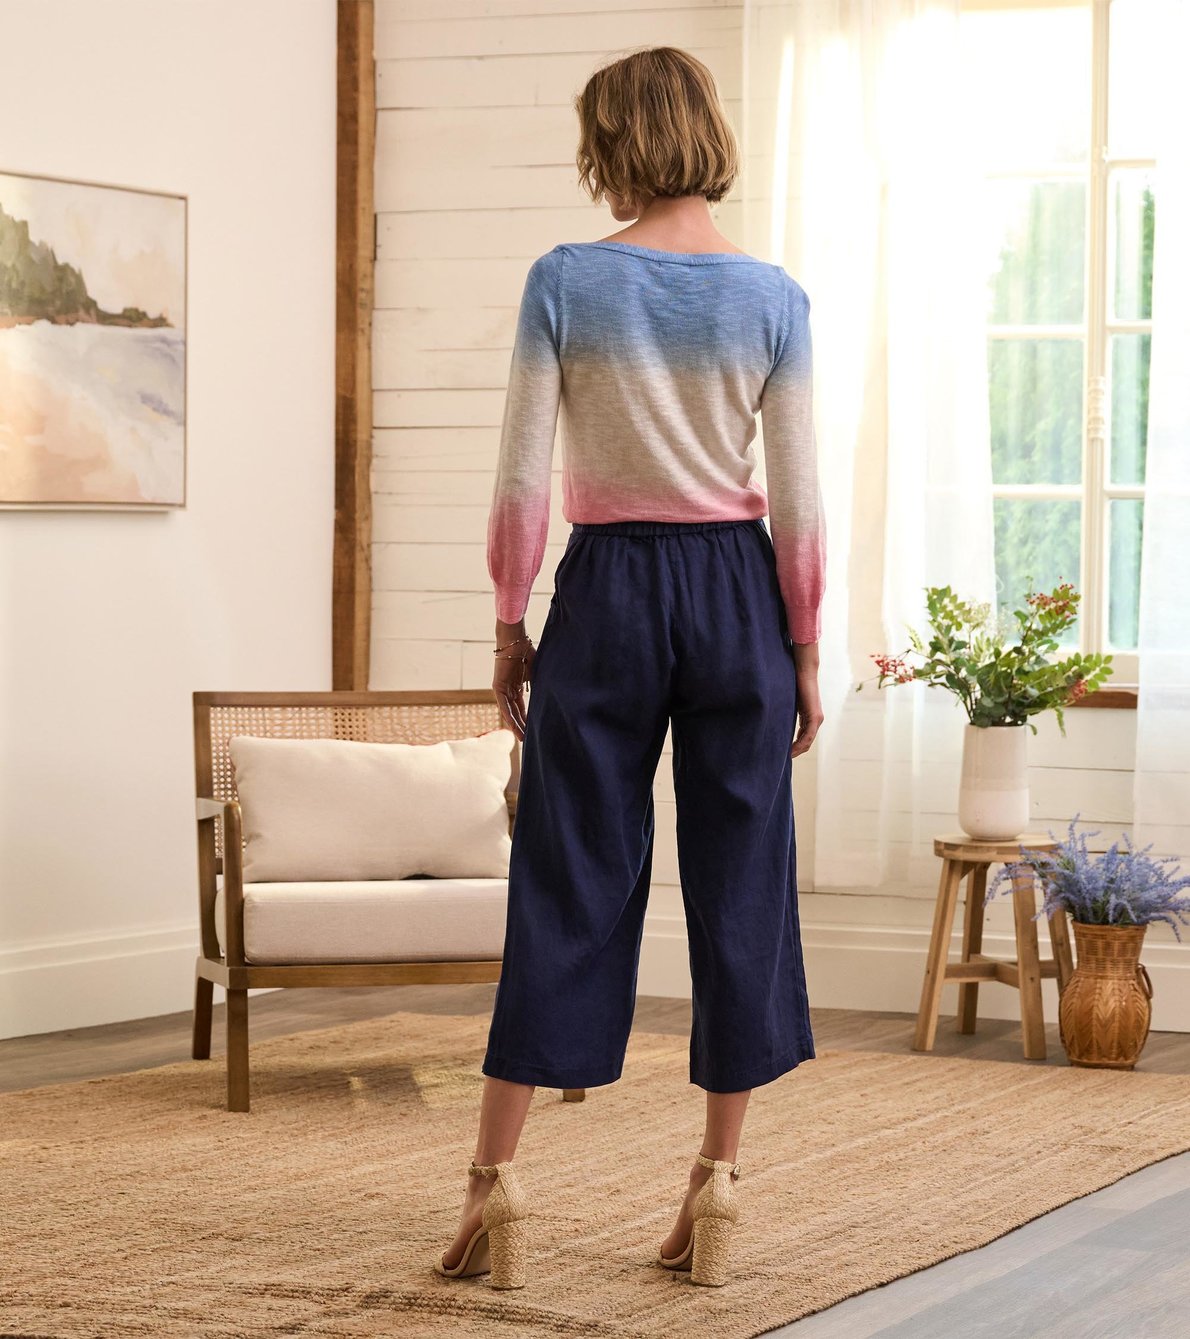 View larger image of Cropped Wide Leg Trousers - Navy